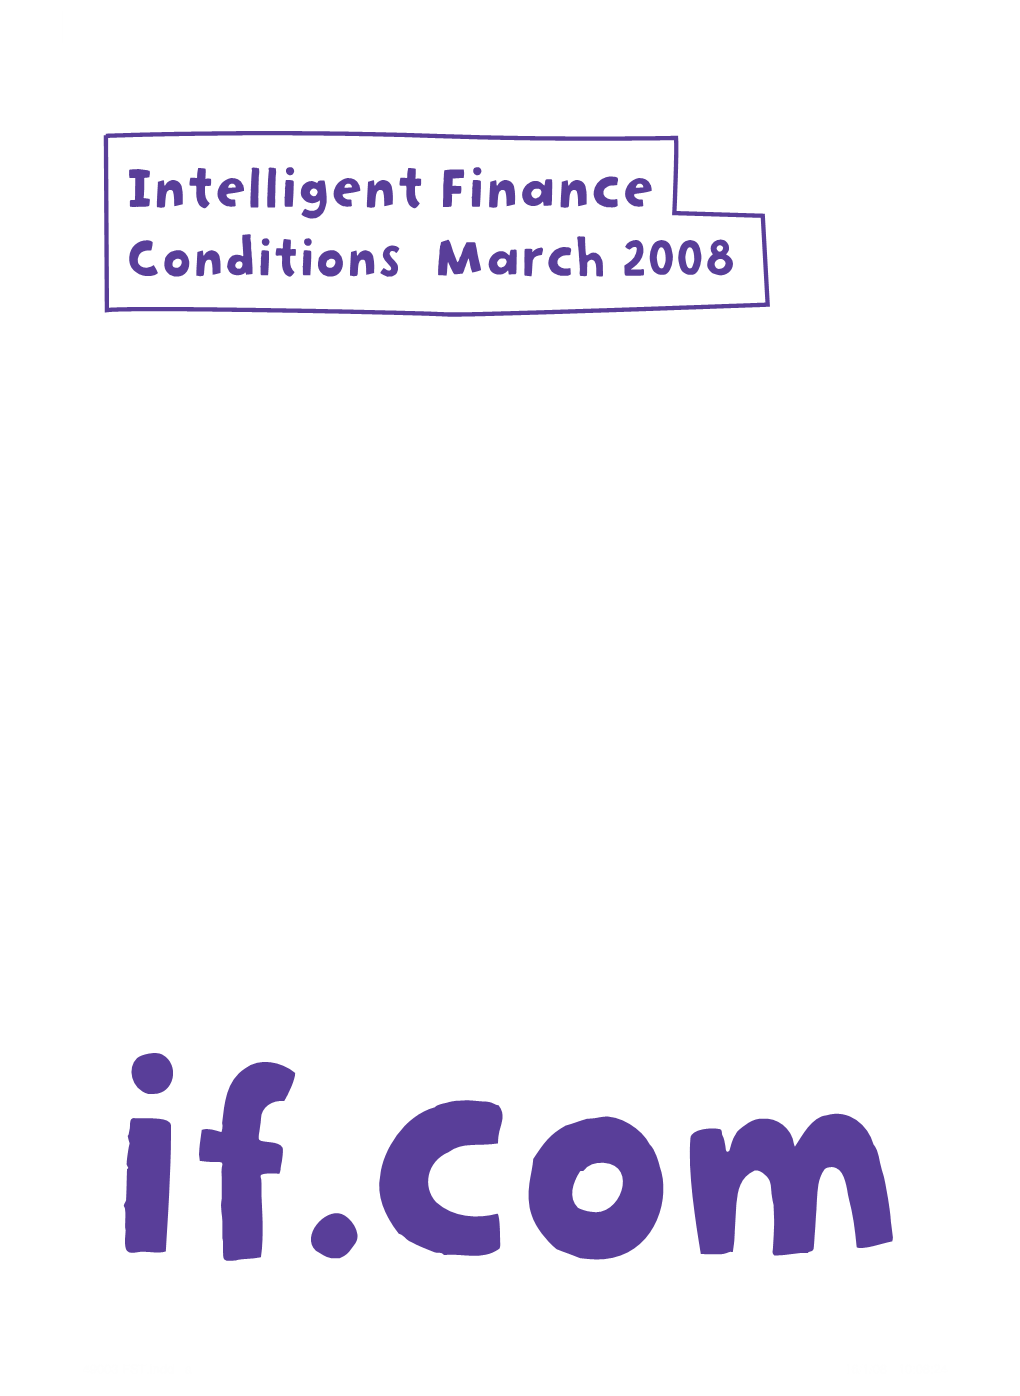 Intelligent Finance Conditions March 2008